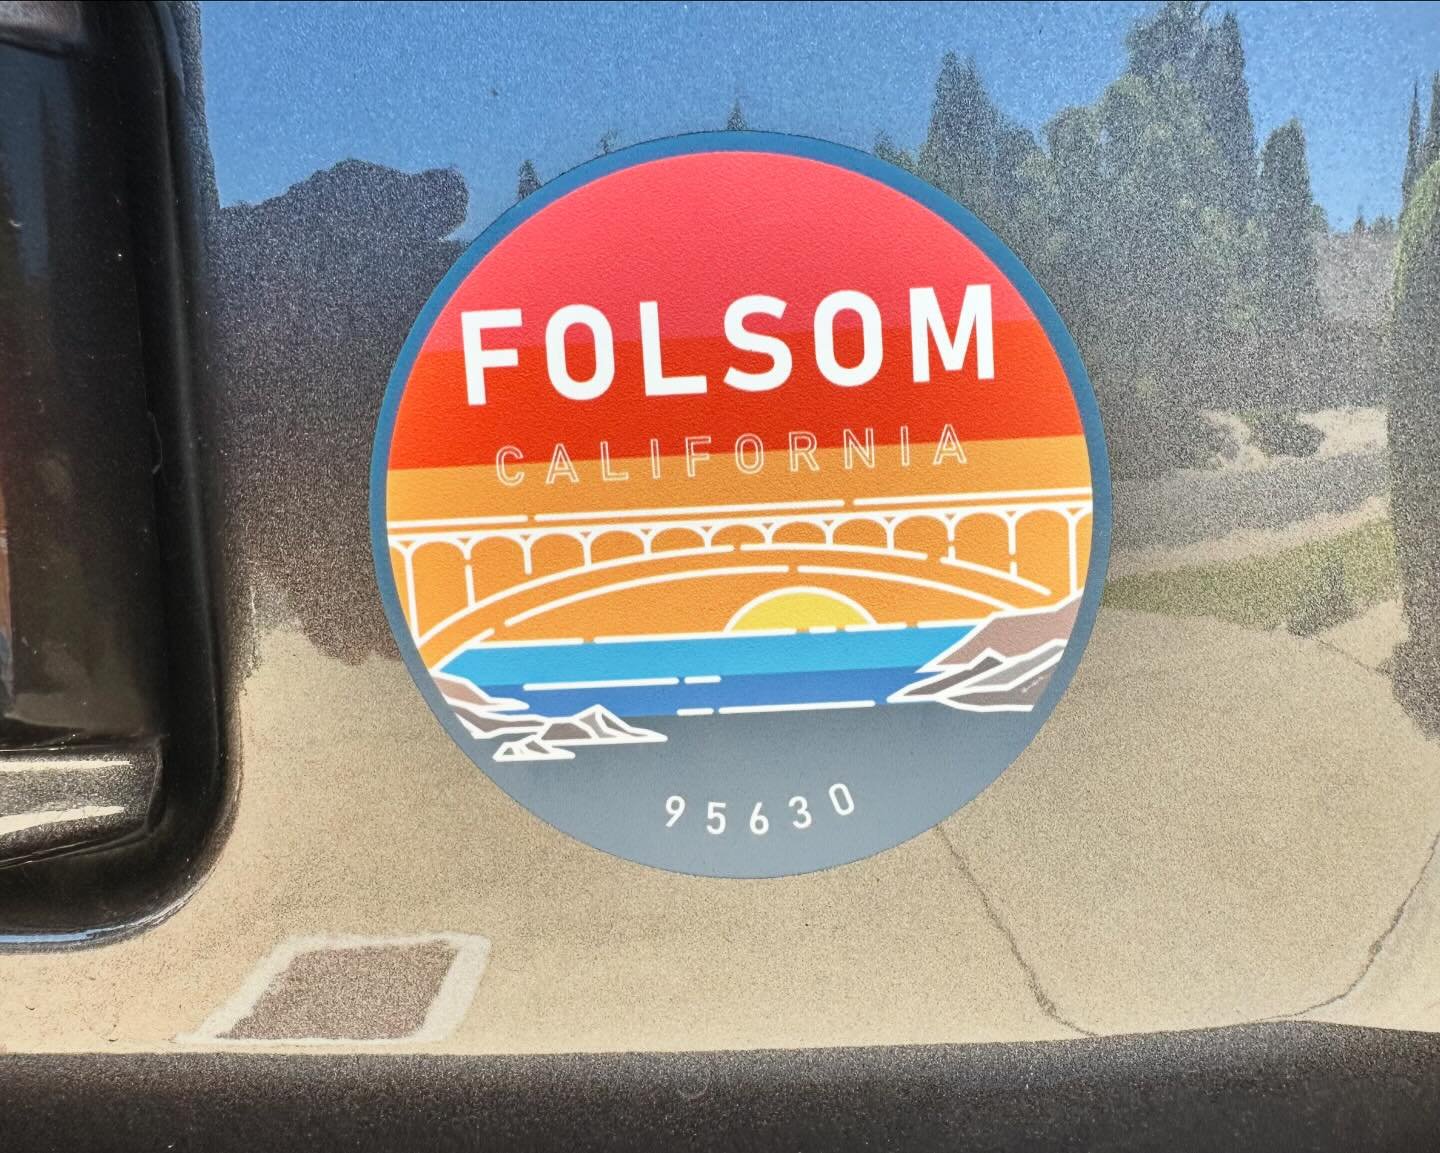 Rep your town! The new Folsom MAGNET is here. Available exclusively at @rubysfolsom in Historic Folsom!